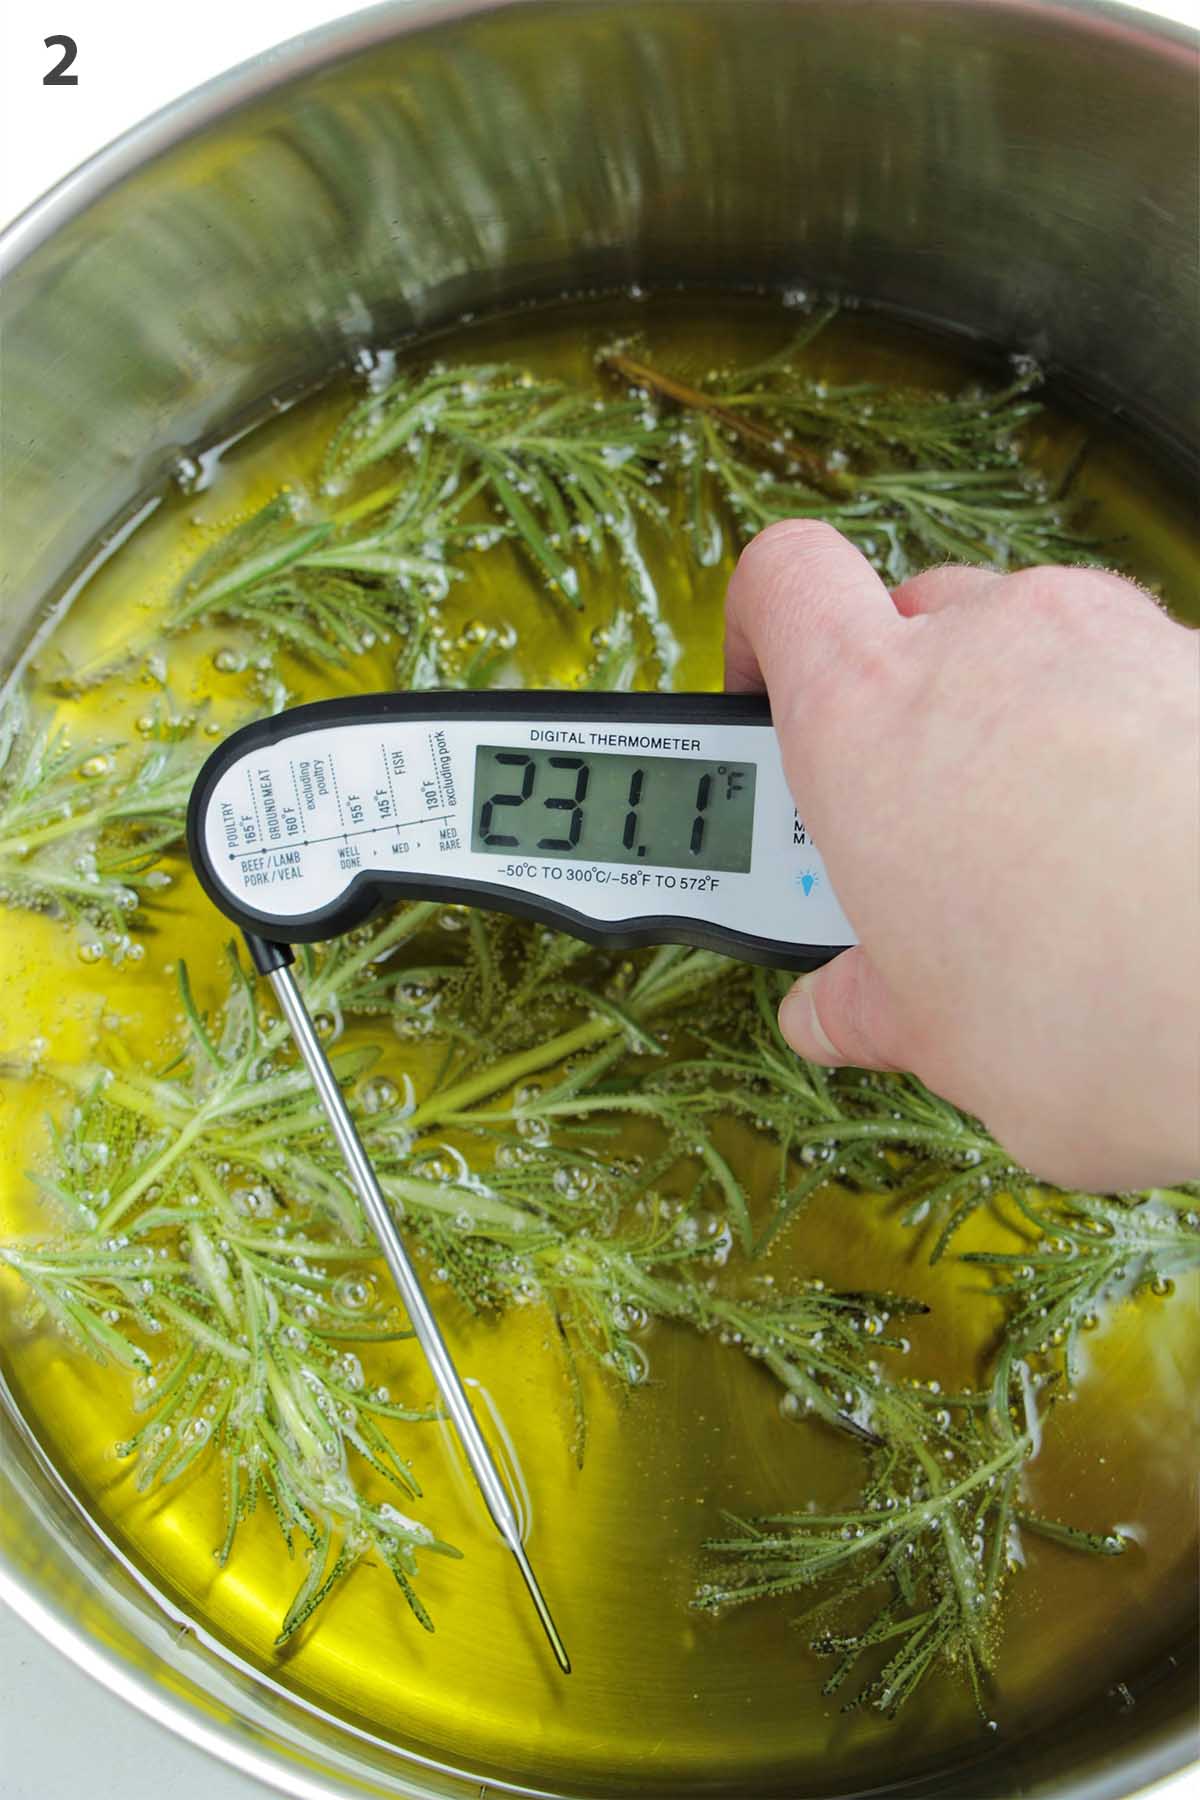 numbered photo taking the temperature of rosemary infused olive oil.